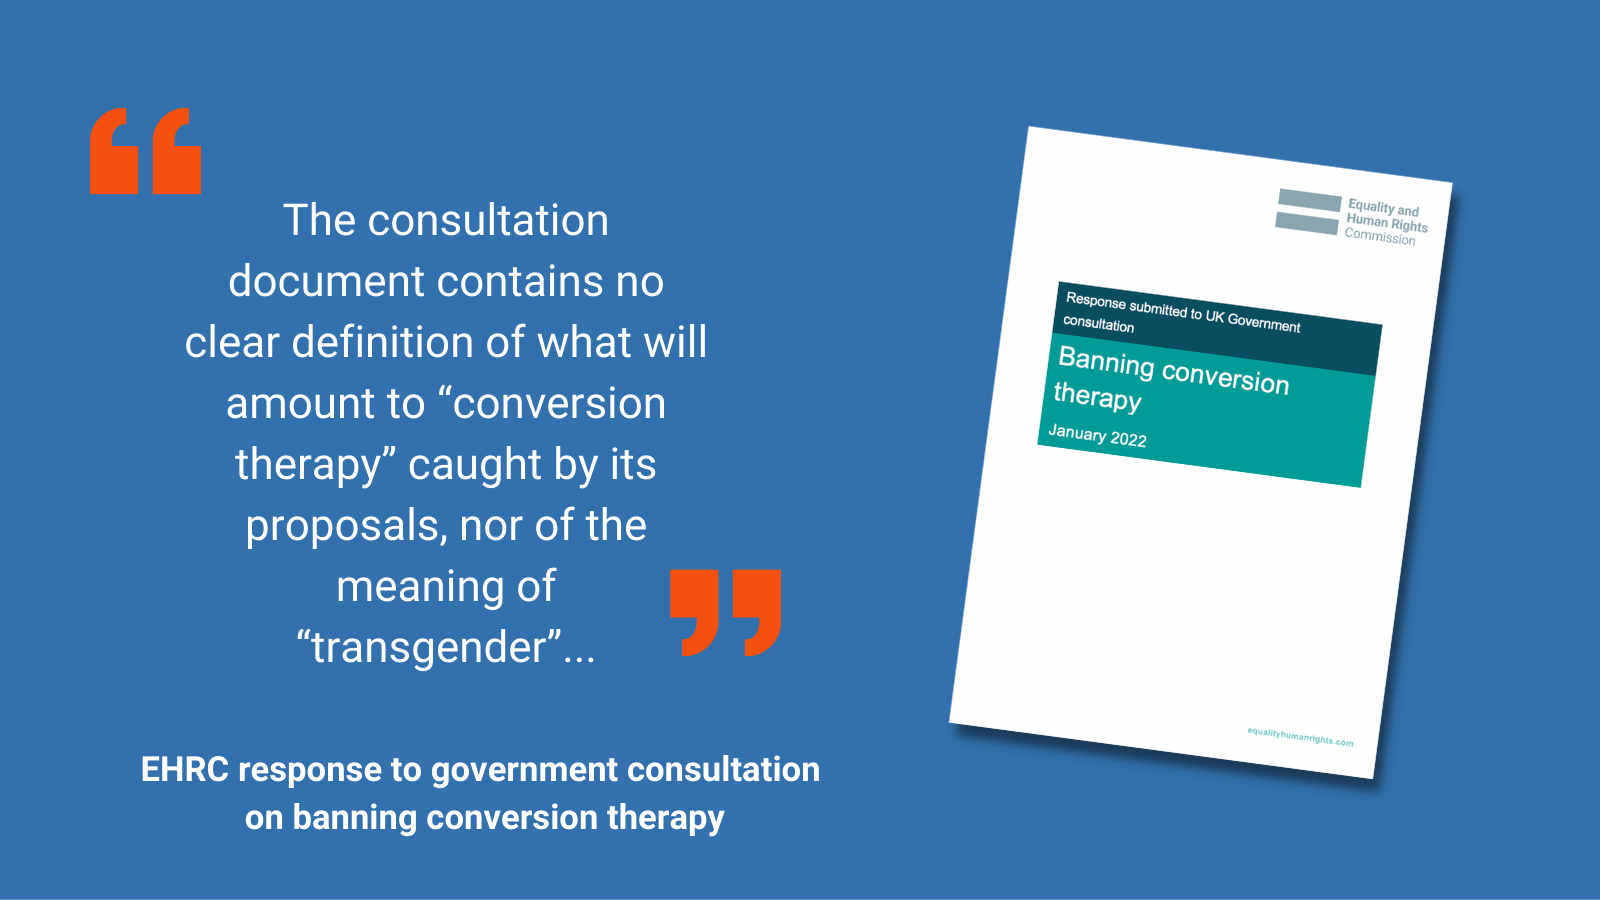 ‘The consultation document contains no clear definition of what will amount to “conversion therapy” caught by its proposals, nor of the meaning of “transgender”...’